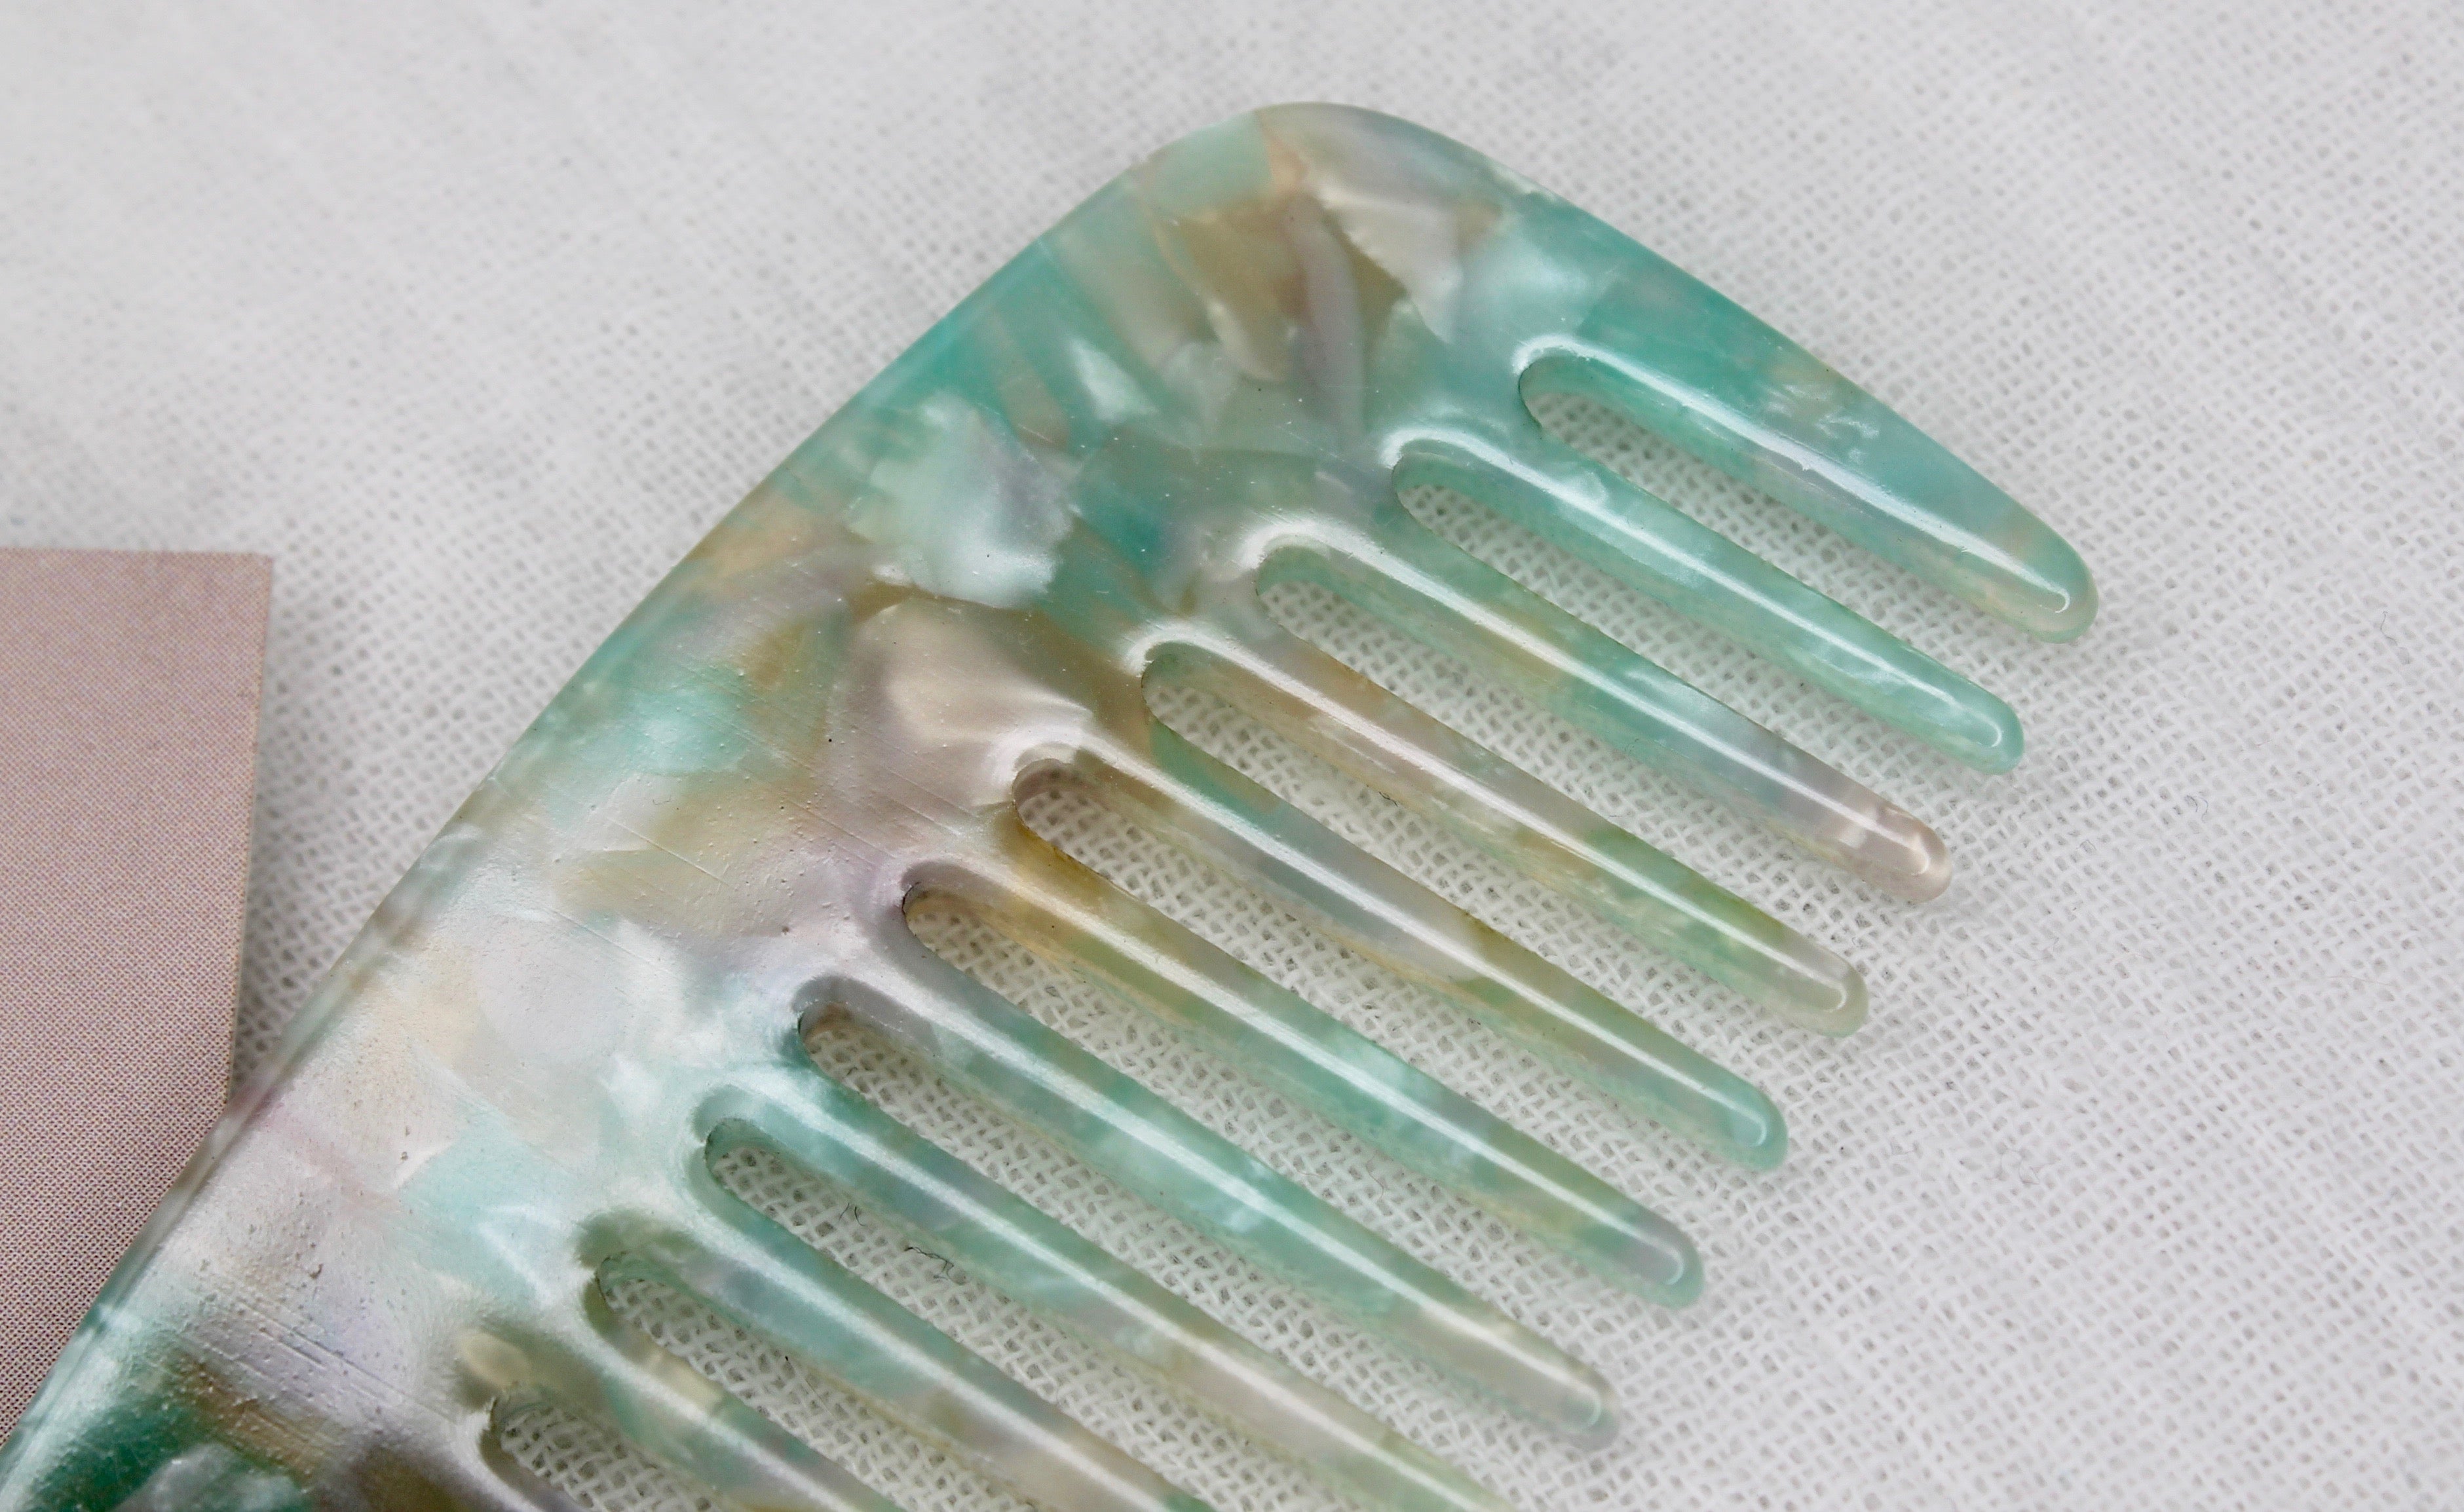 Green Marble Comb